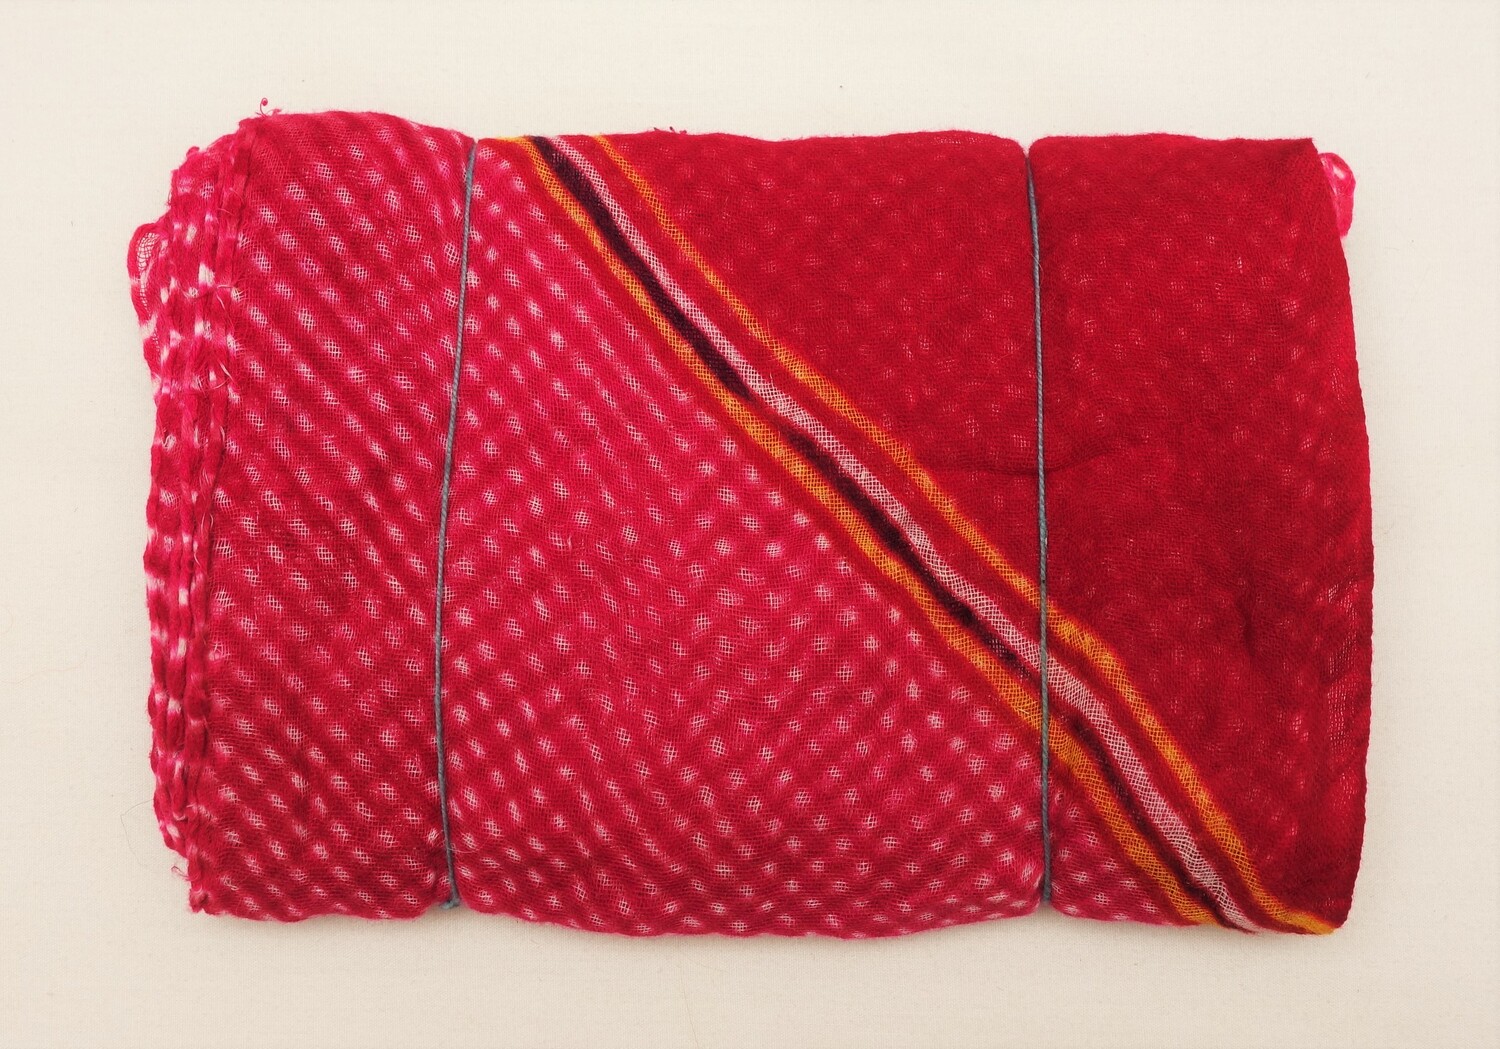 Bundle of folded, loosely woven cloth for a turban, which has been tied at regular intervals prior to dyeing. Mothra cloth. Jaipur, Rajasthan, India, 1980 (TRC 2022.2122).